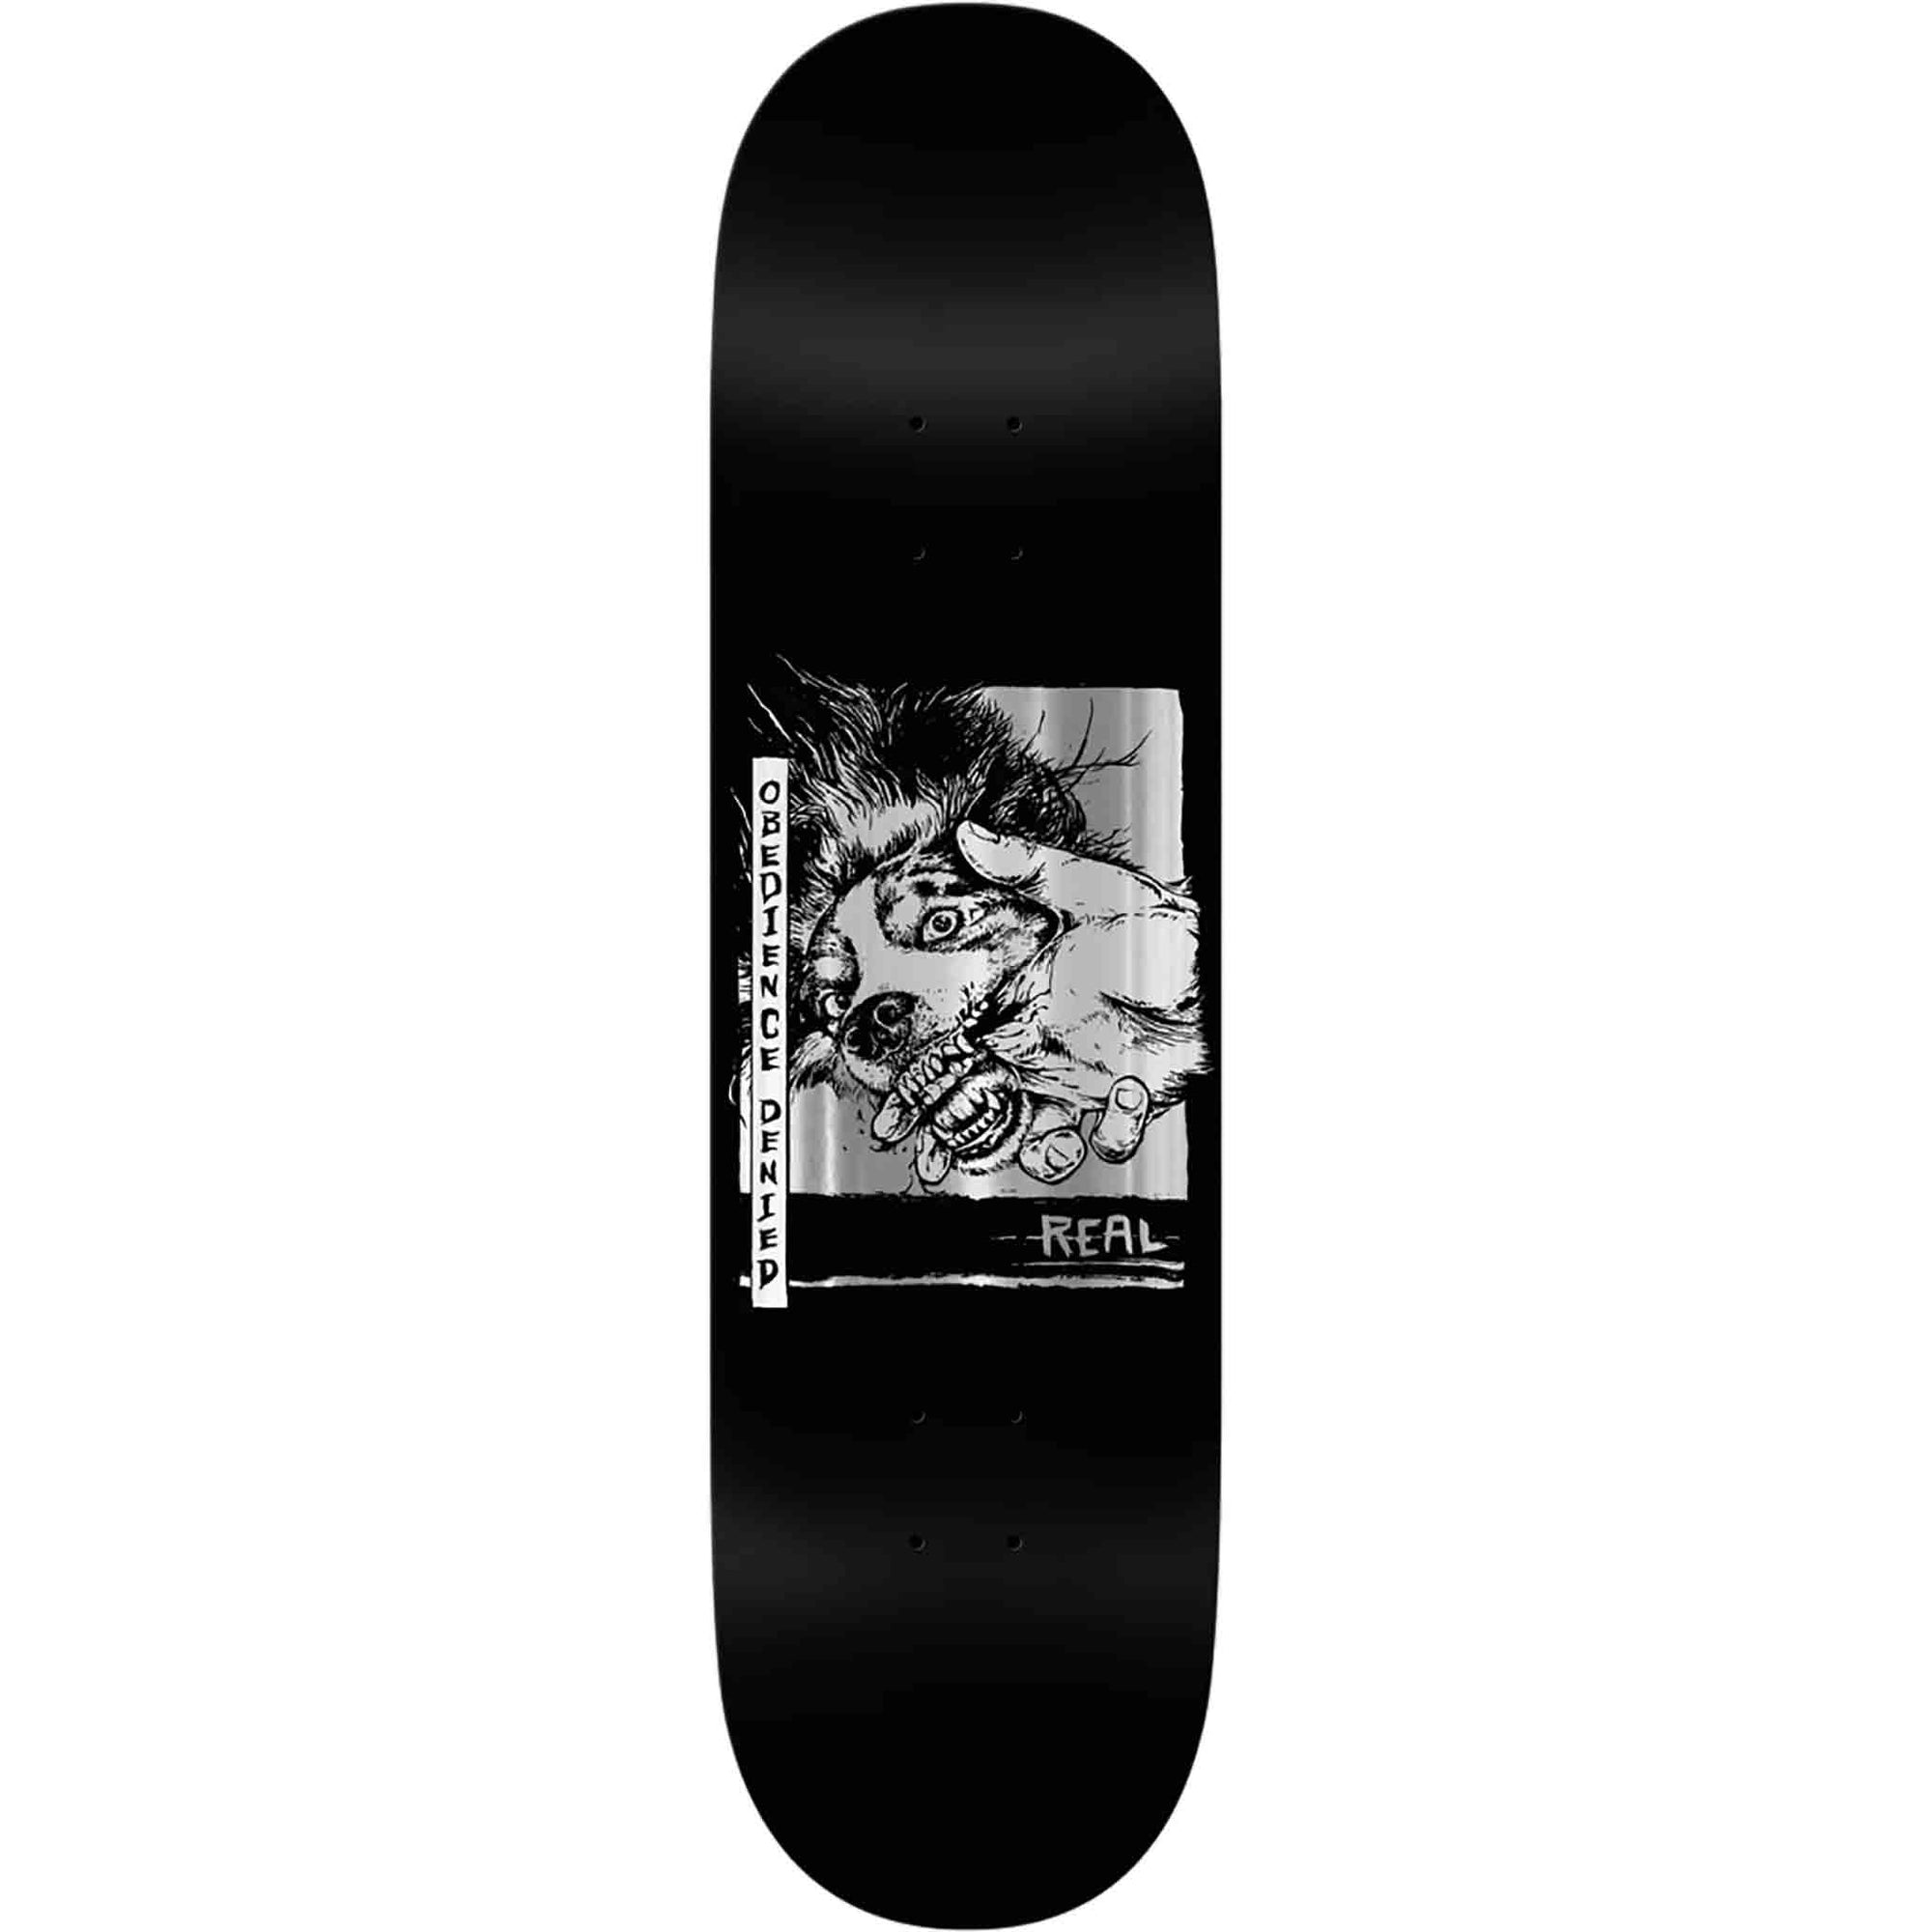 REAL DECK OBEDIENCE DENIED (8.75") - The Drive Skateshop